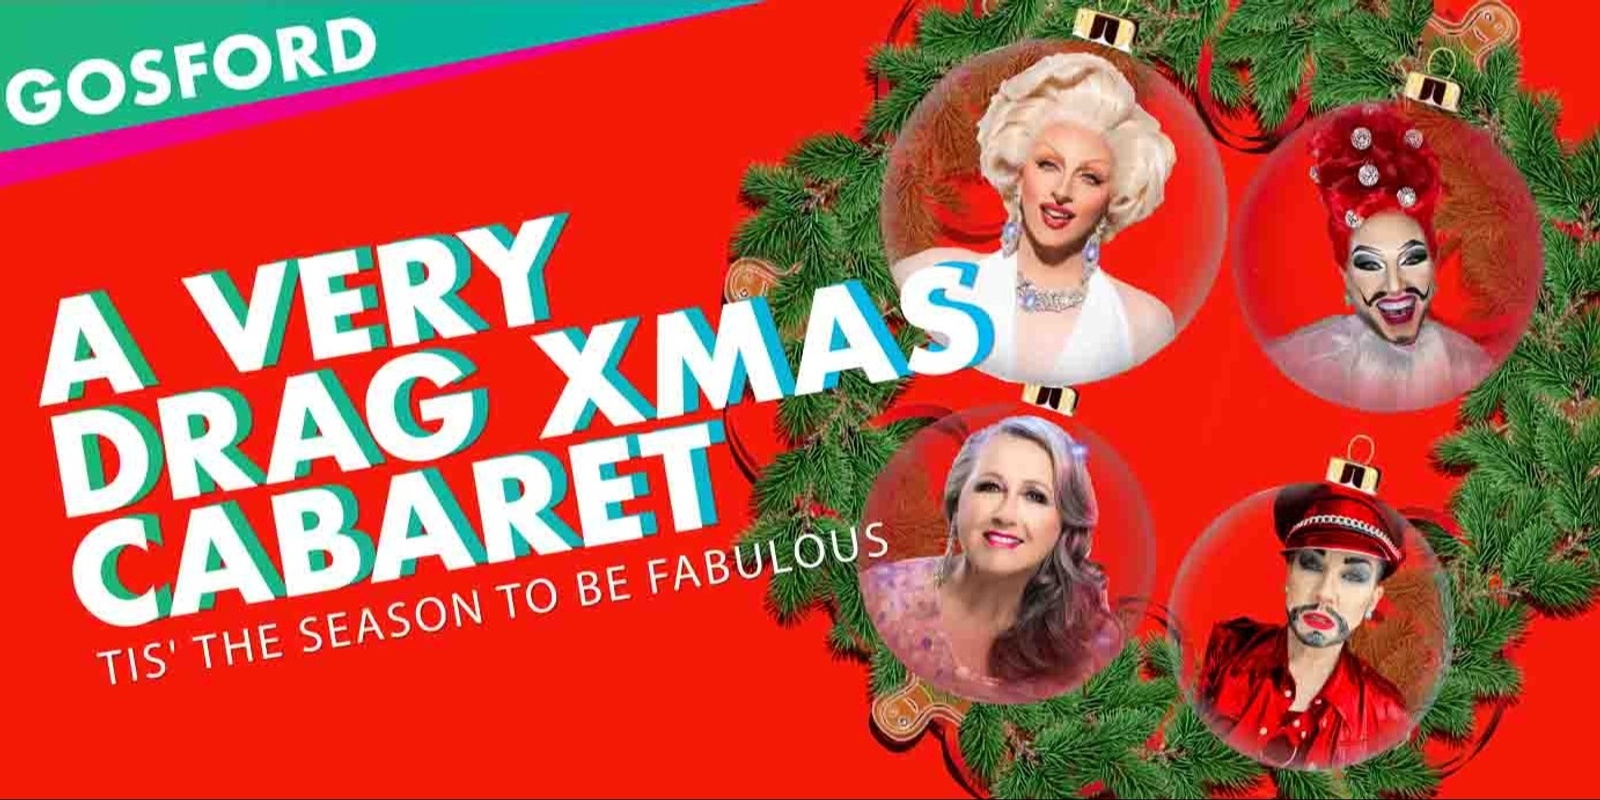 Banner image for A Very Drag Xmas Cabaret